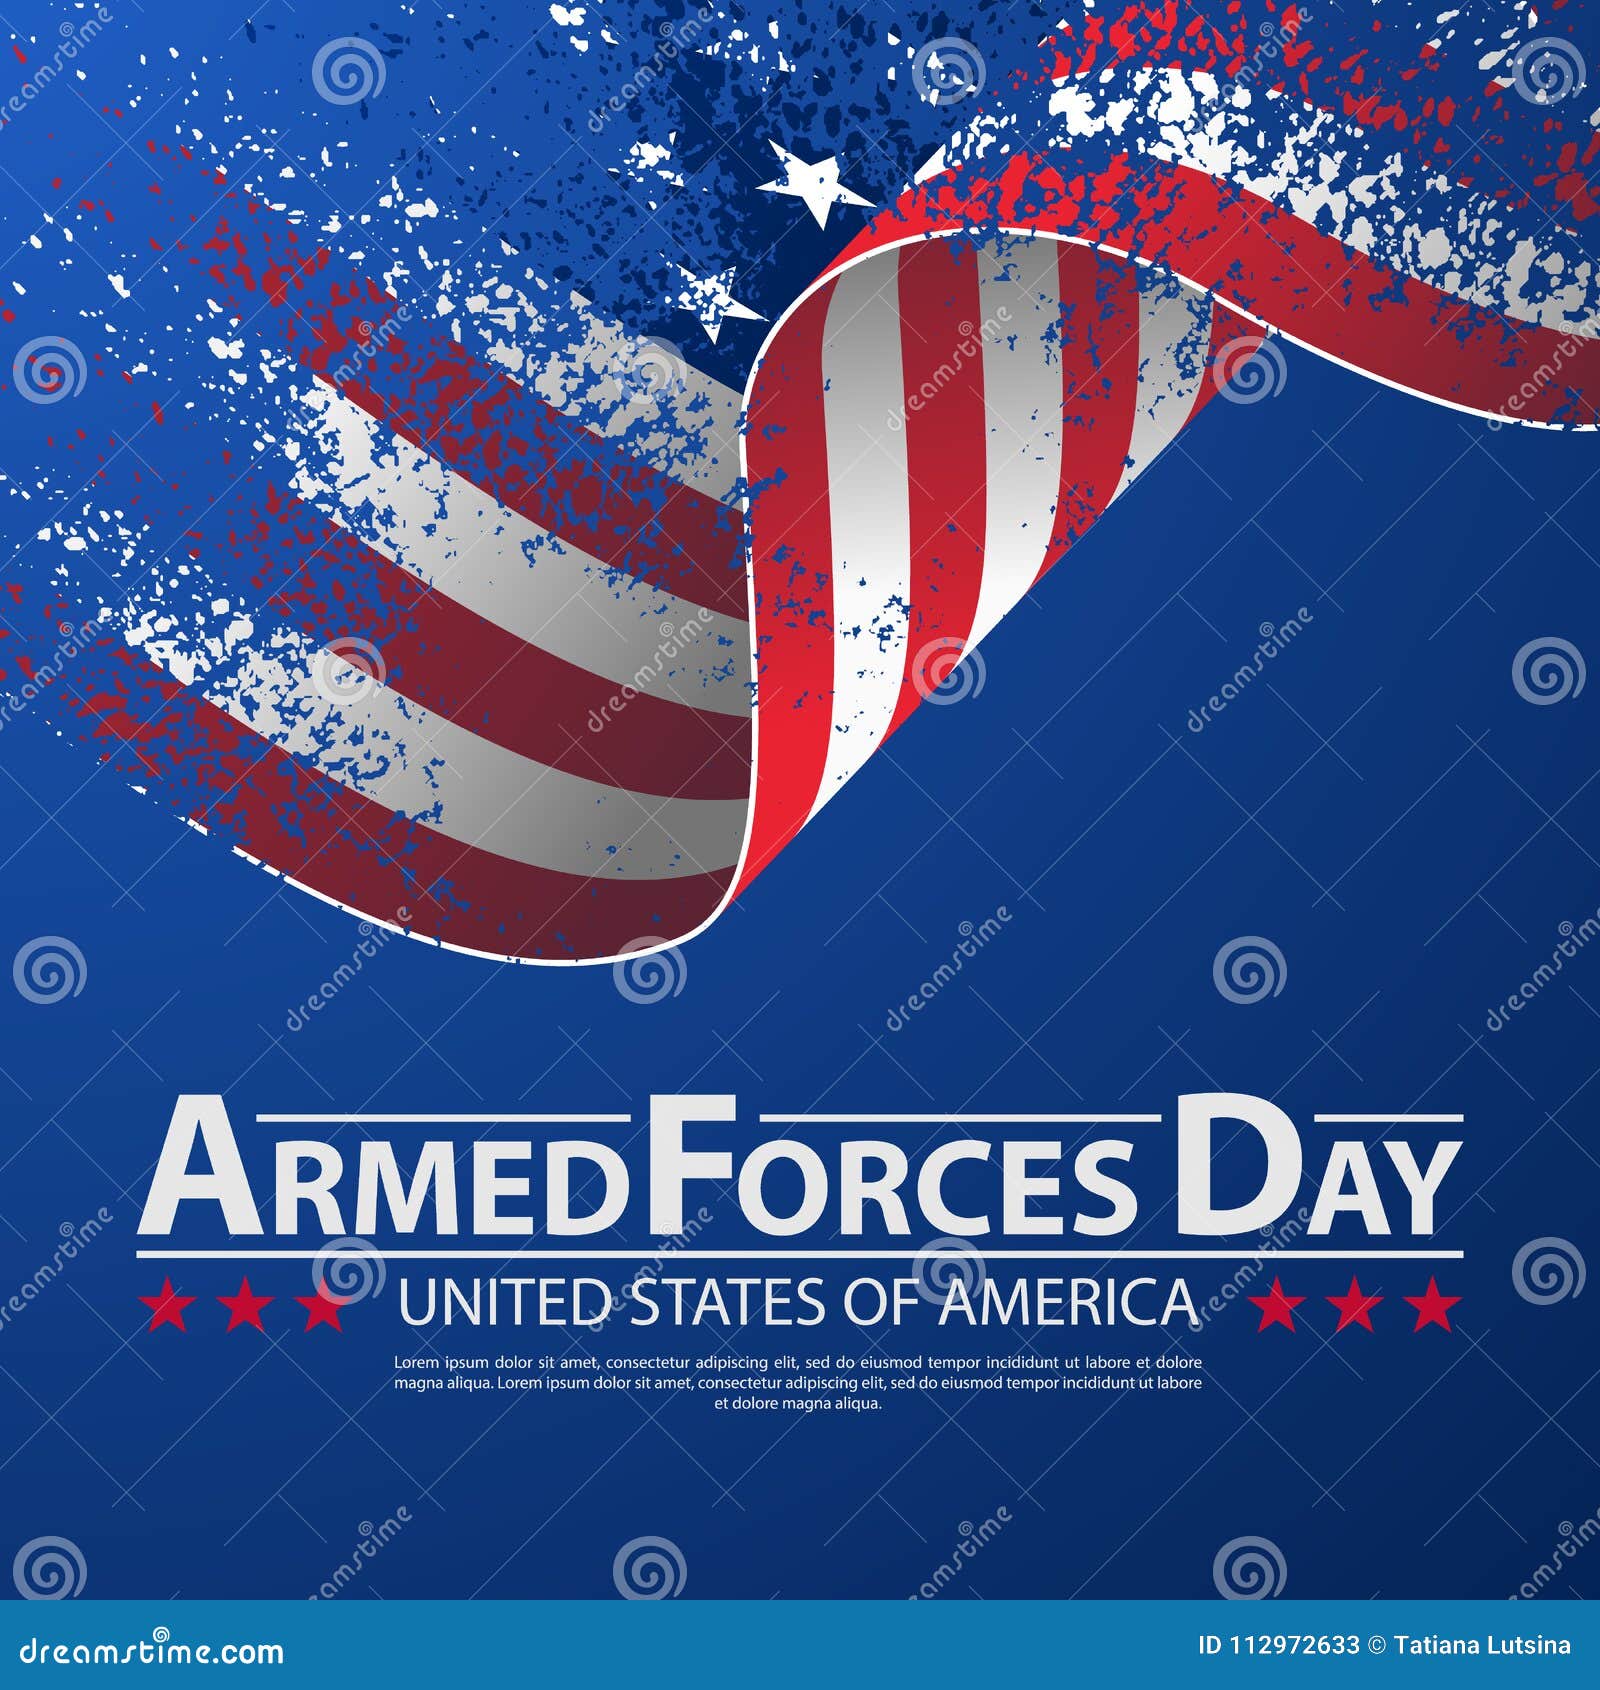 armed forces day template poster .   background for armed forces day.